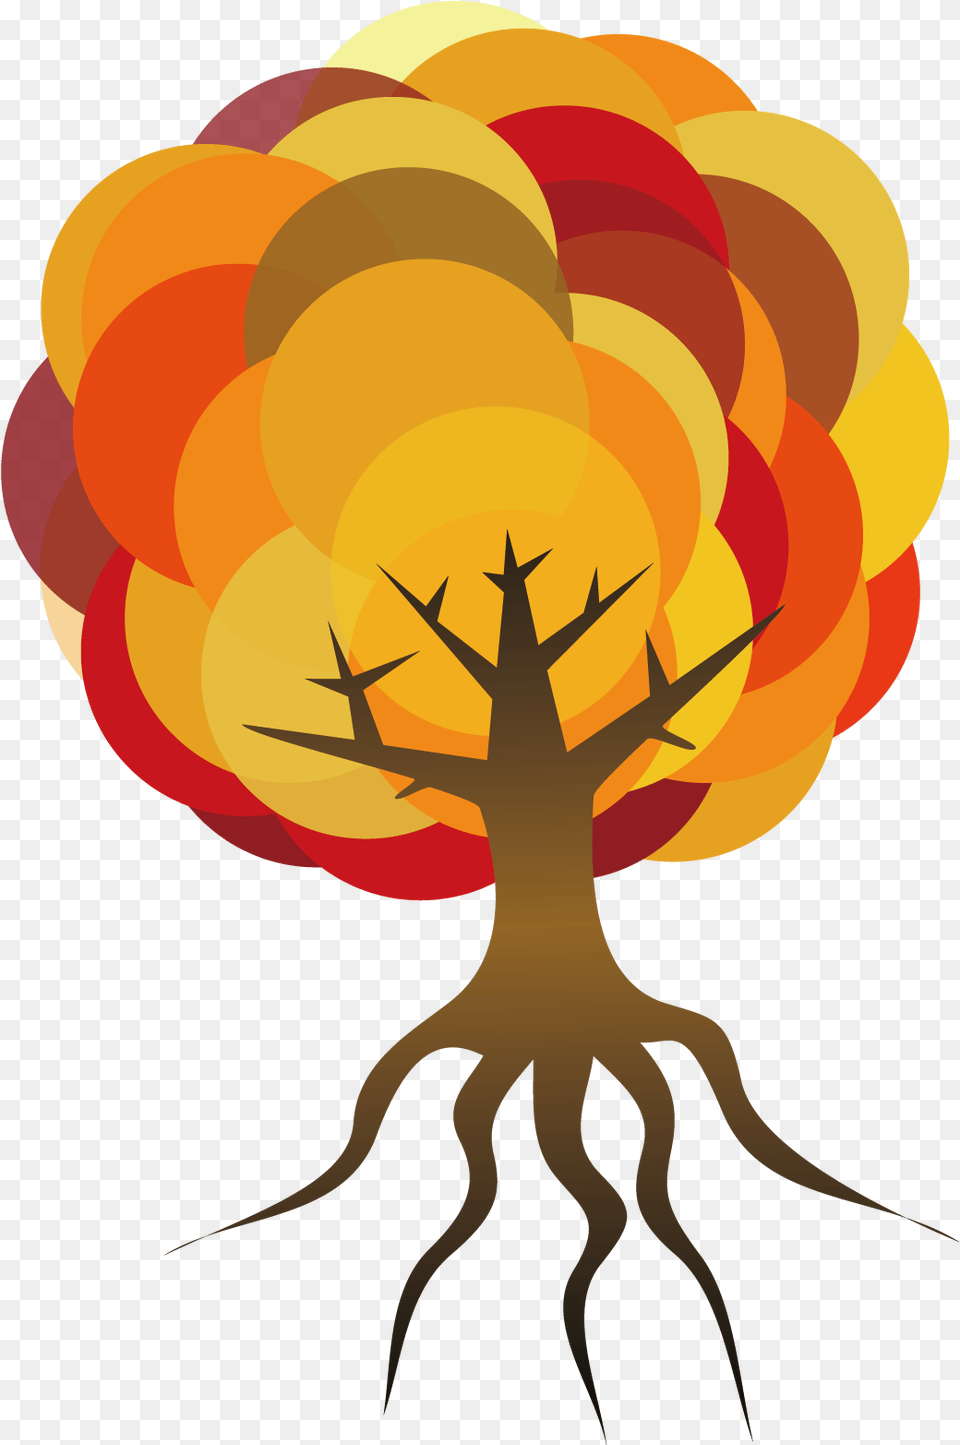 Download Tree Root Clip Art Tree Tree Illustration Simple With Roots, Fire Free Transparent Png